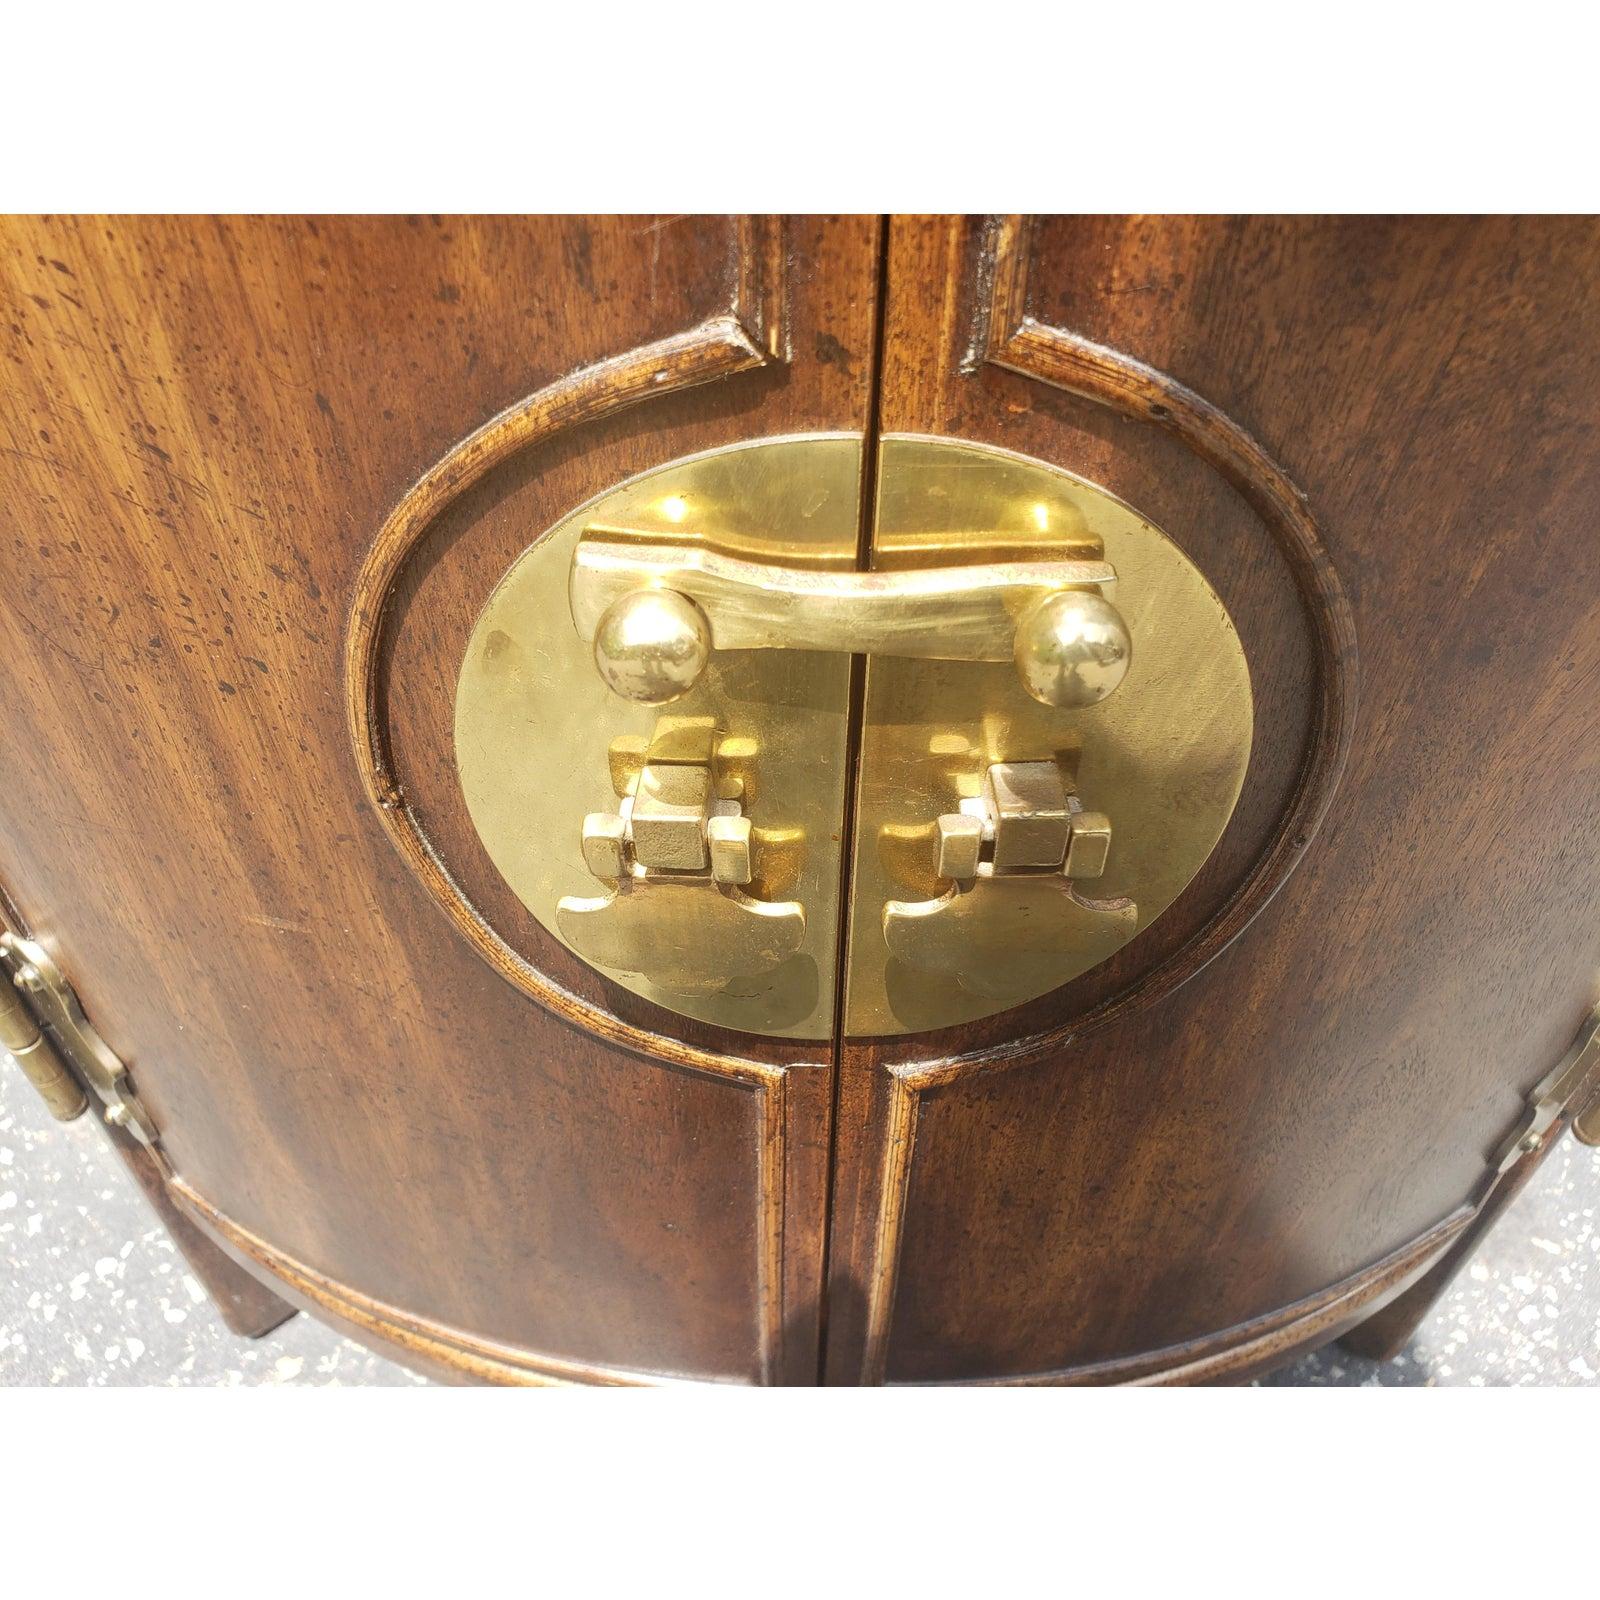 Solid walnut drum style accent table cabinet. Banded and Burl walnut veneer top. Double door with Asian style hardware in excellent condition. Measures 27